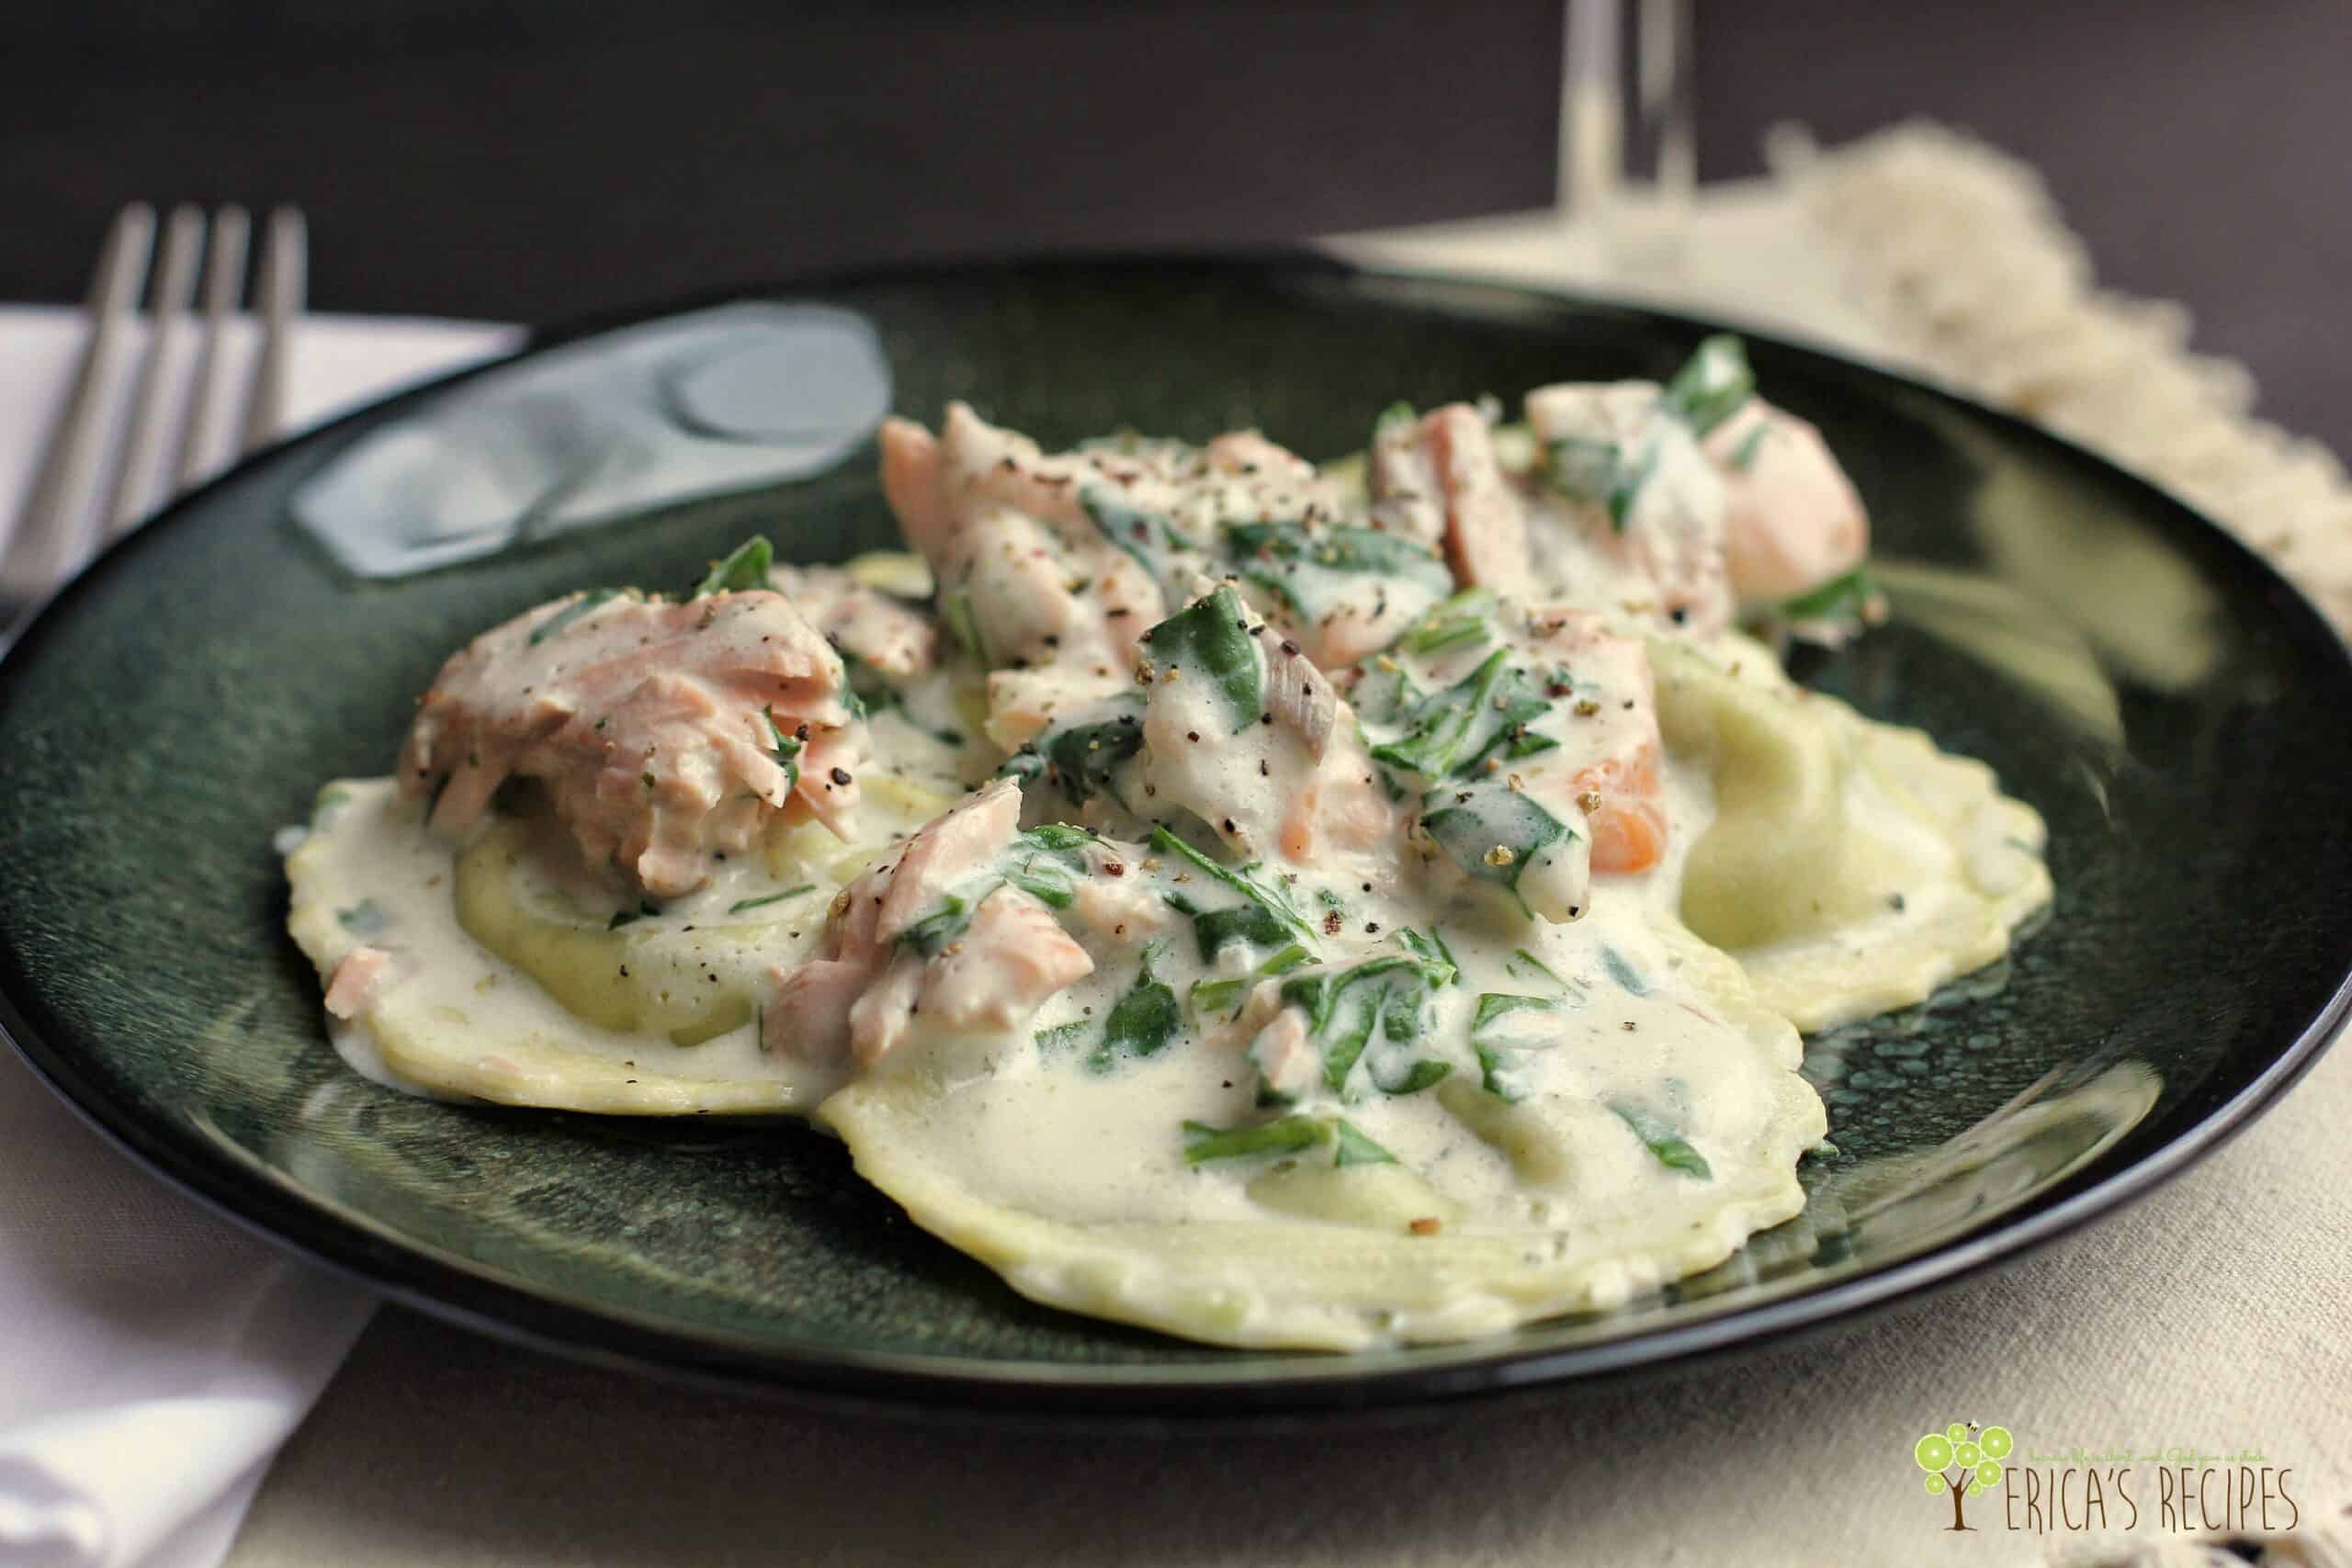 Weeknight Ravioli with Spinach, Salmon, and Boursin Cheese Sauce